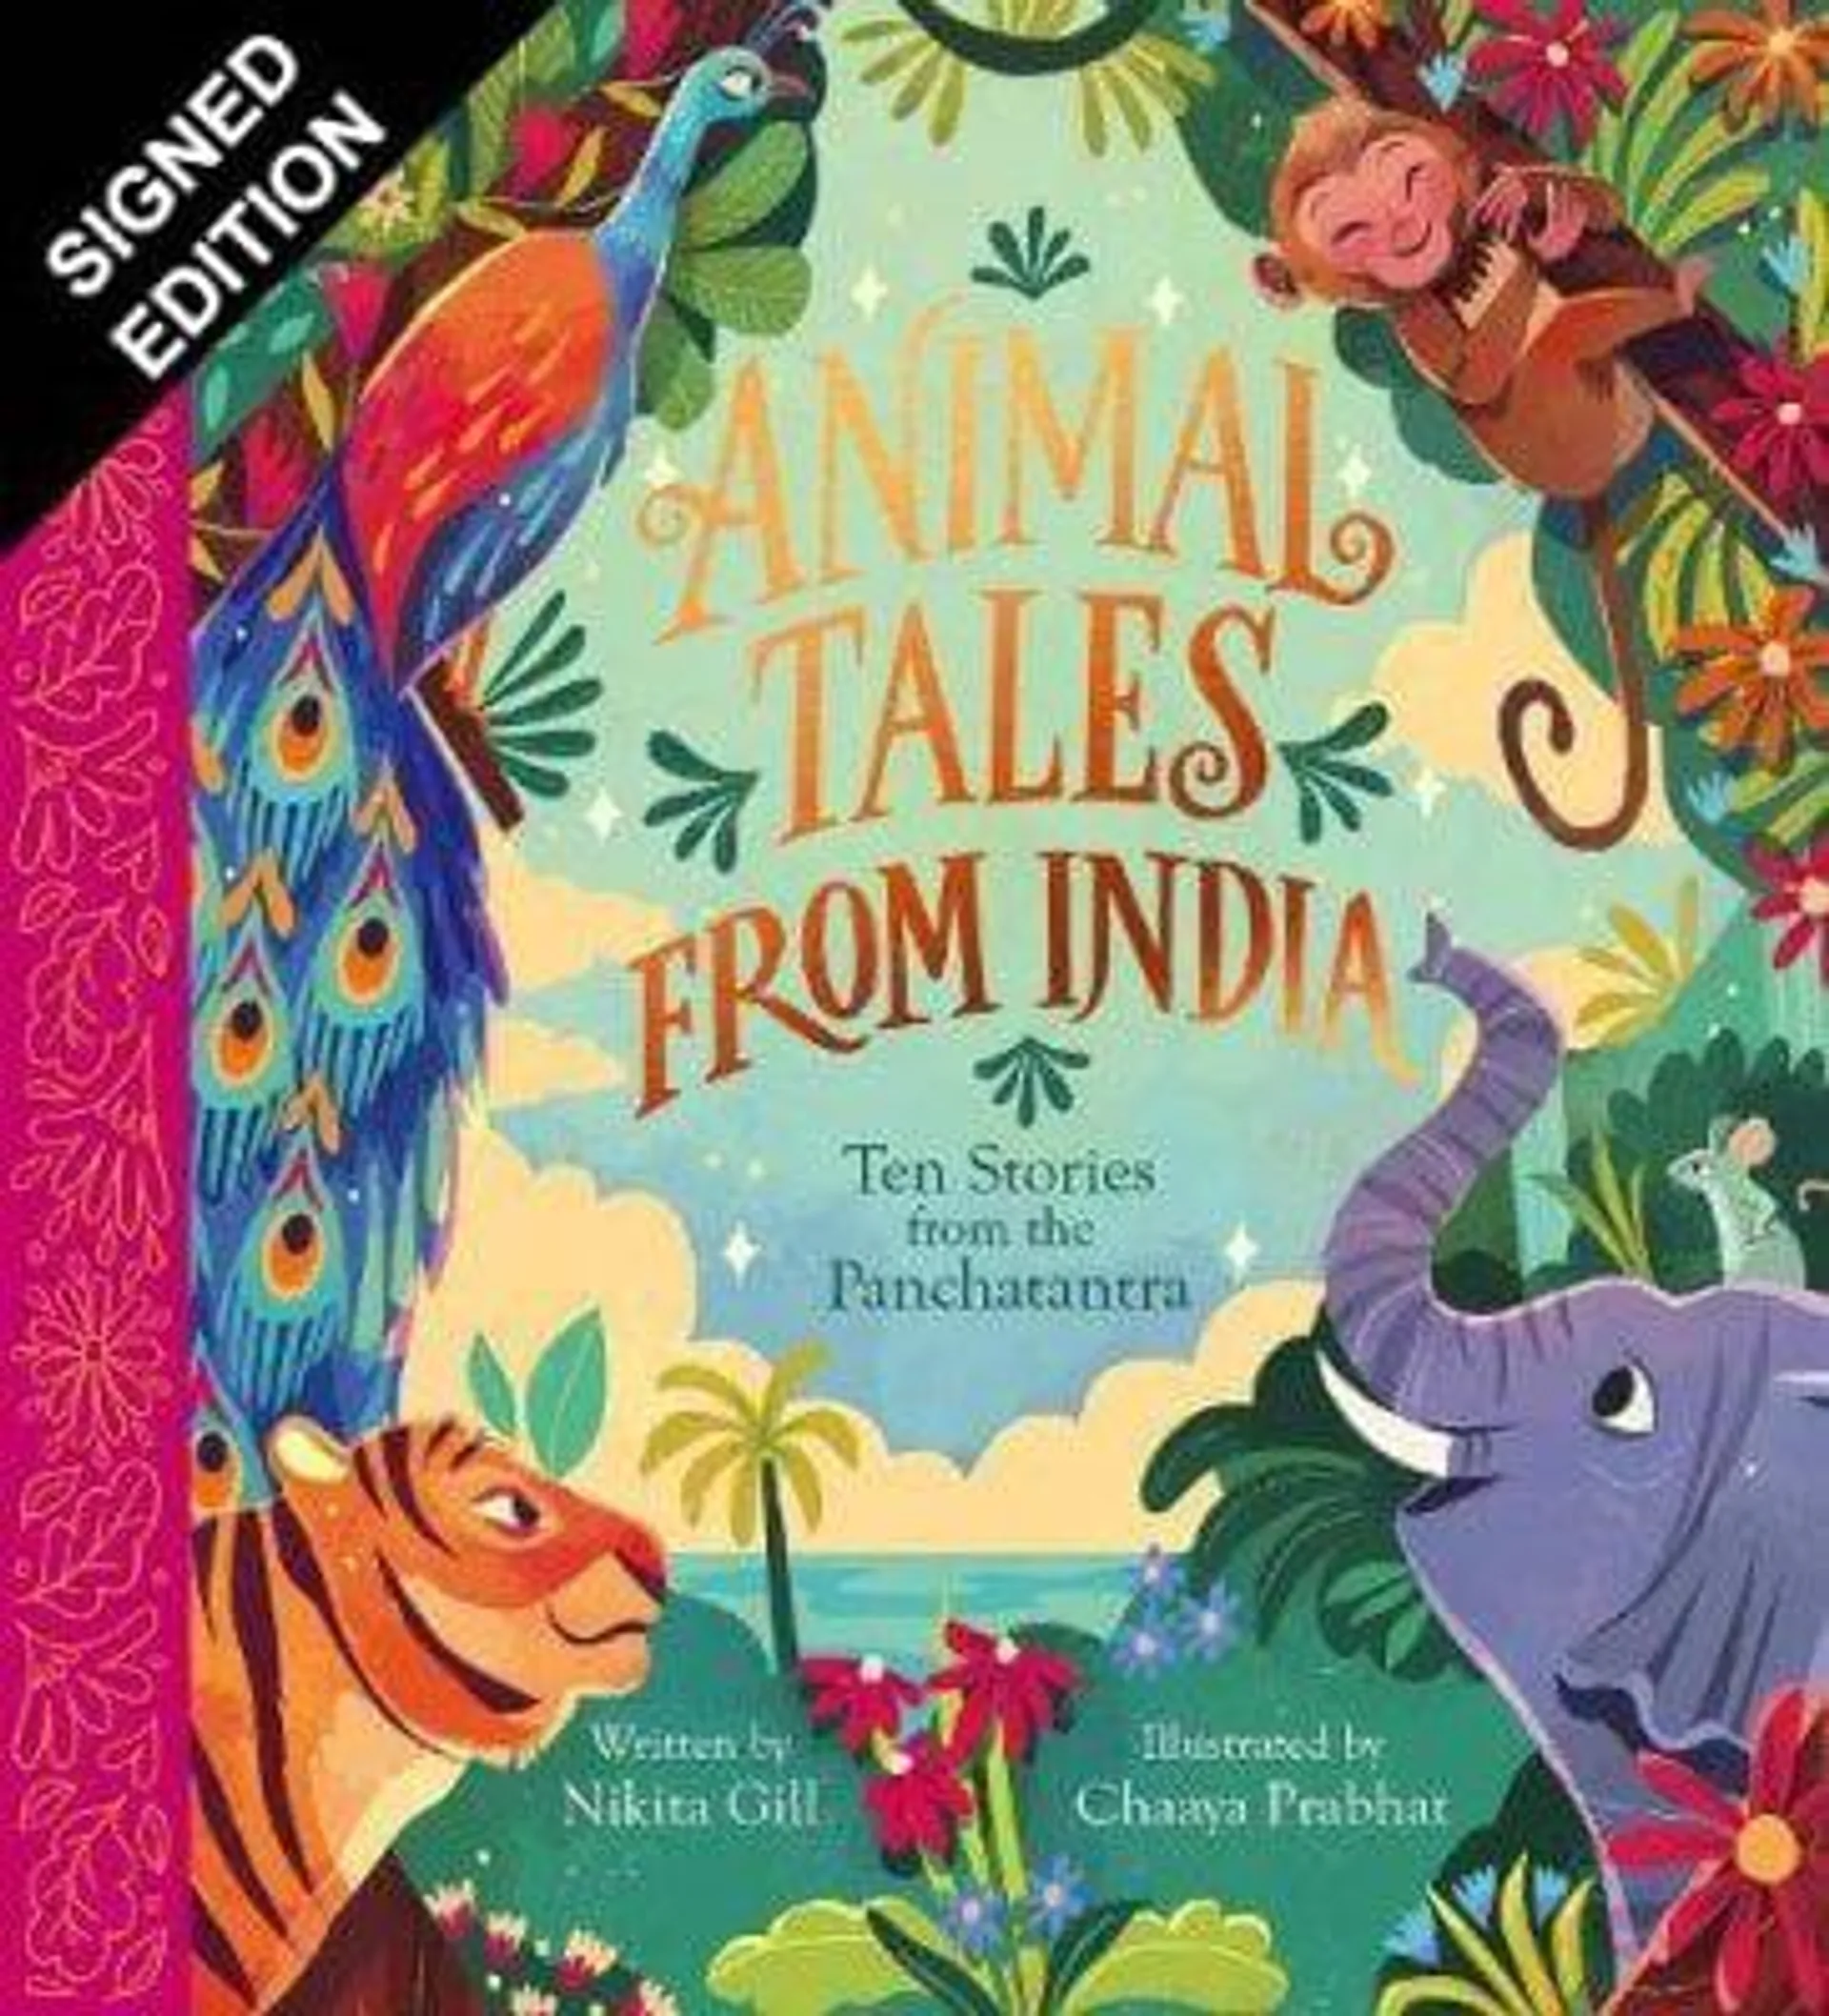 Animal Tales from India: Ten Stories from the Panchatantra: Signed Edition (Hardback)